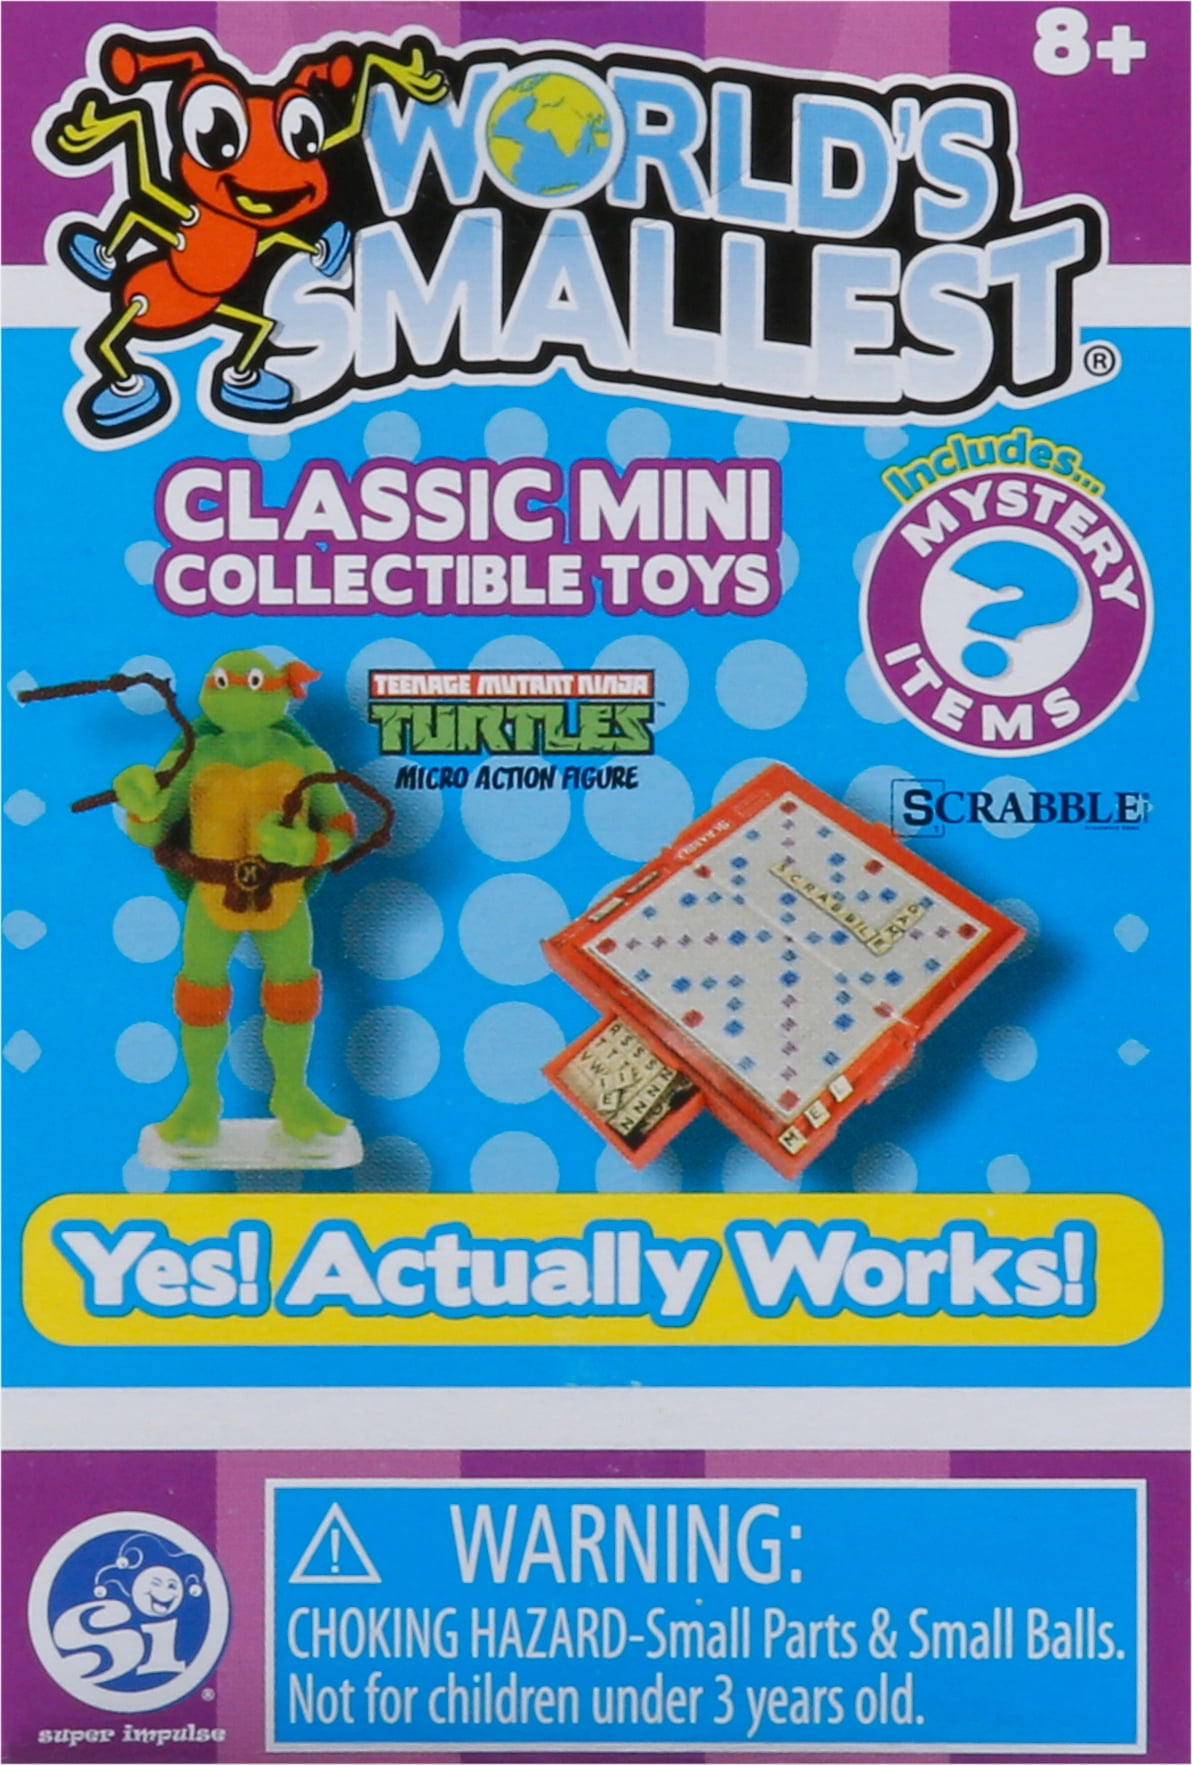 World's Smallest - Secret Smallest 2” Blind Box Miniature Classic Toy  (Display of 24) by Super Impulse